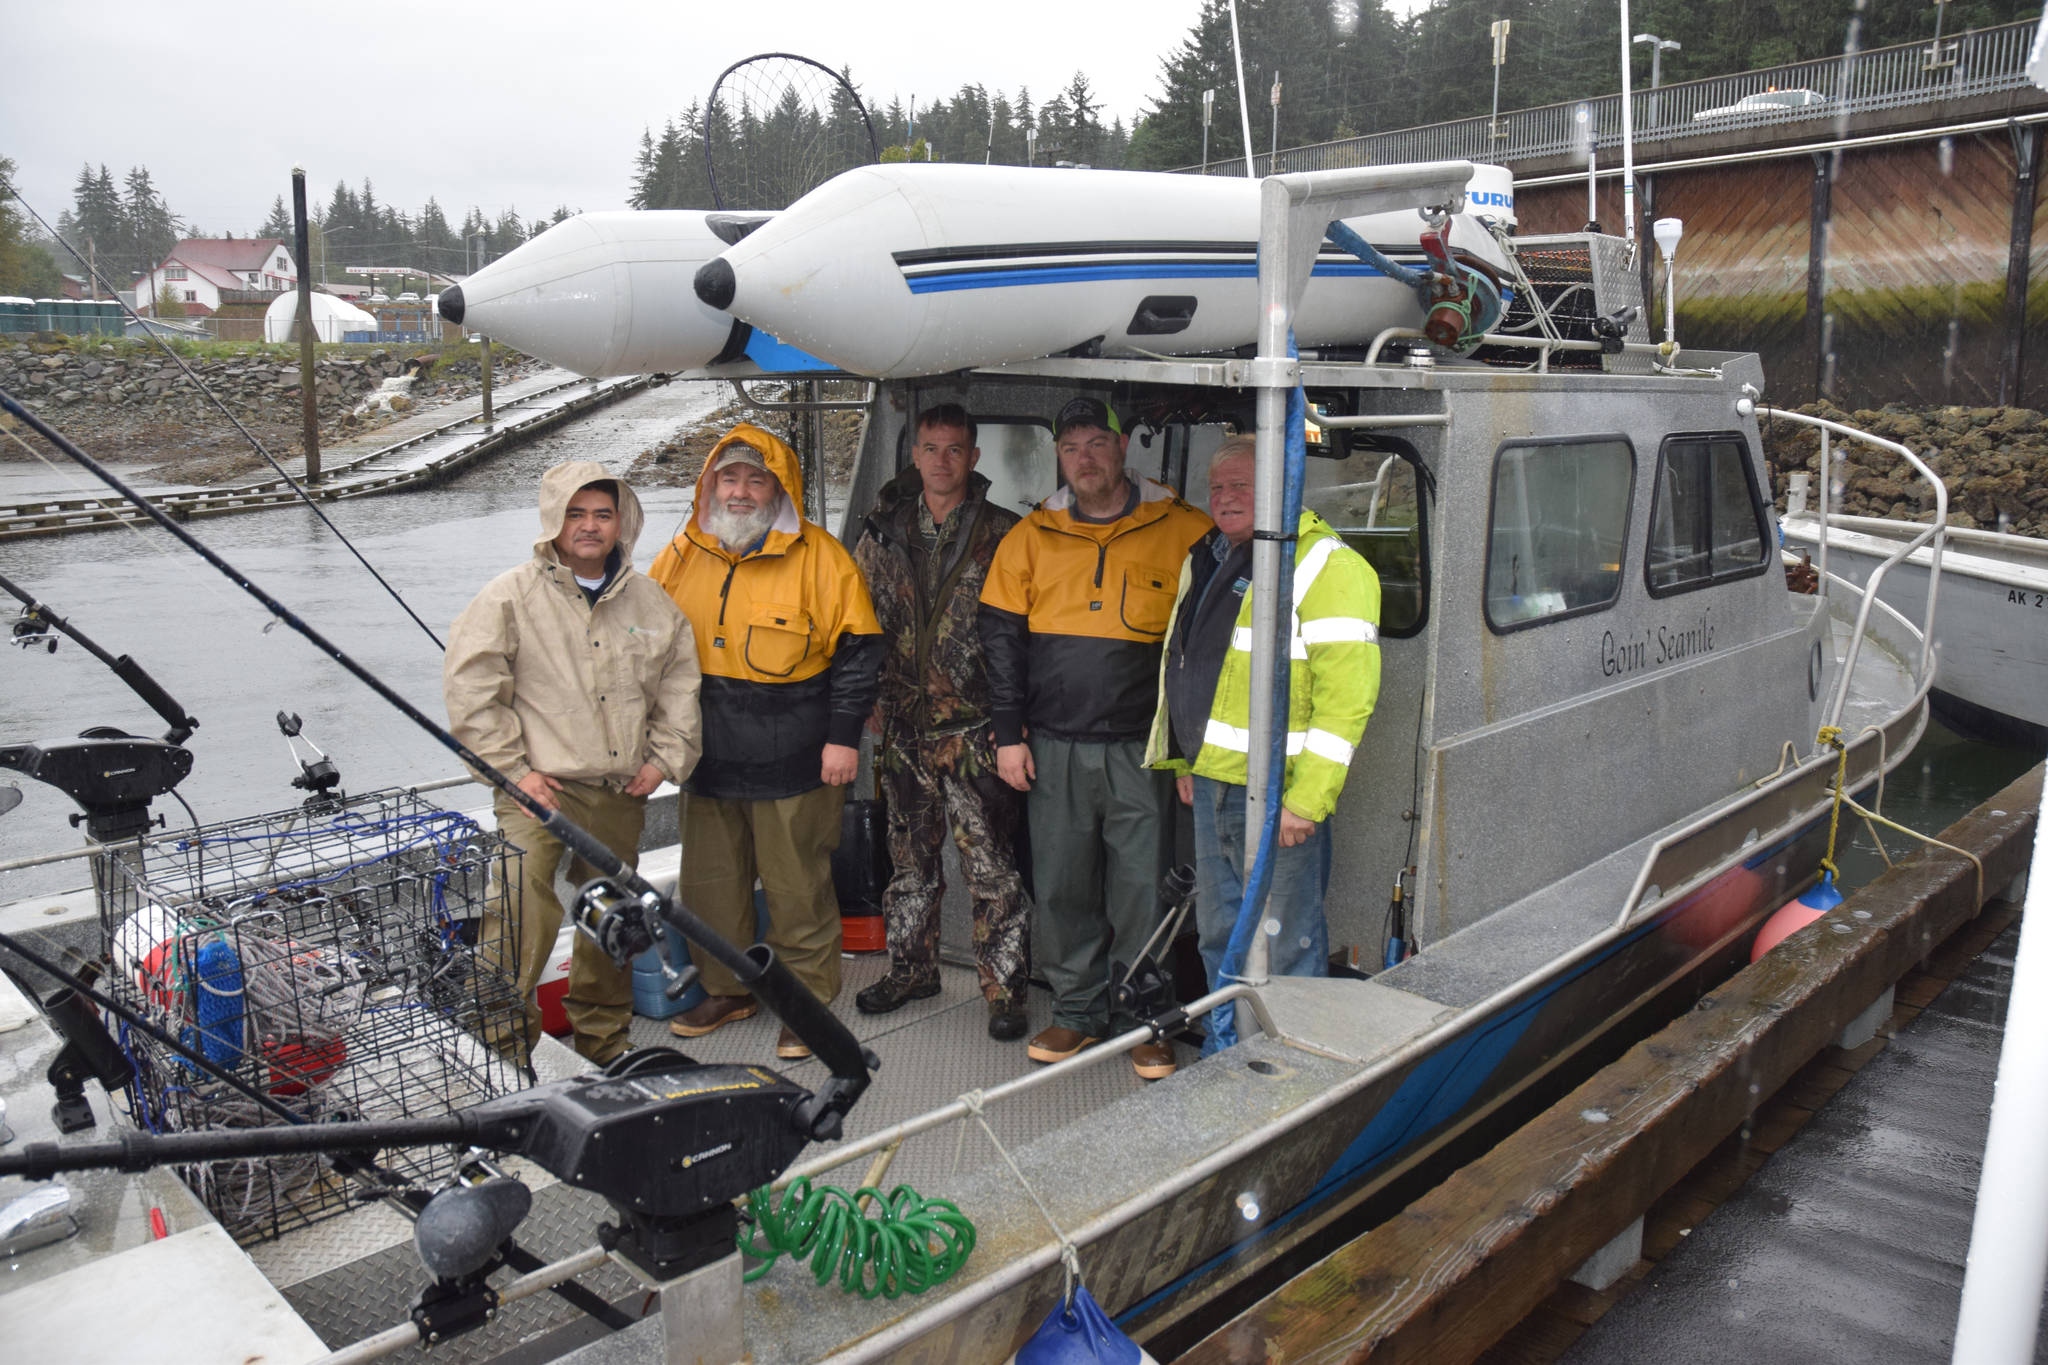 Veterans and Elks Lodge members pose for a photo before a fishing outing sponsored by the Elks Lodge. Pictured from left are: Juvenciano Soto, Mike Moffitt, Roscoe Archer, Alex Kelly and Dale Vilander. (Kevin Gullufsen | Juneau Empire)